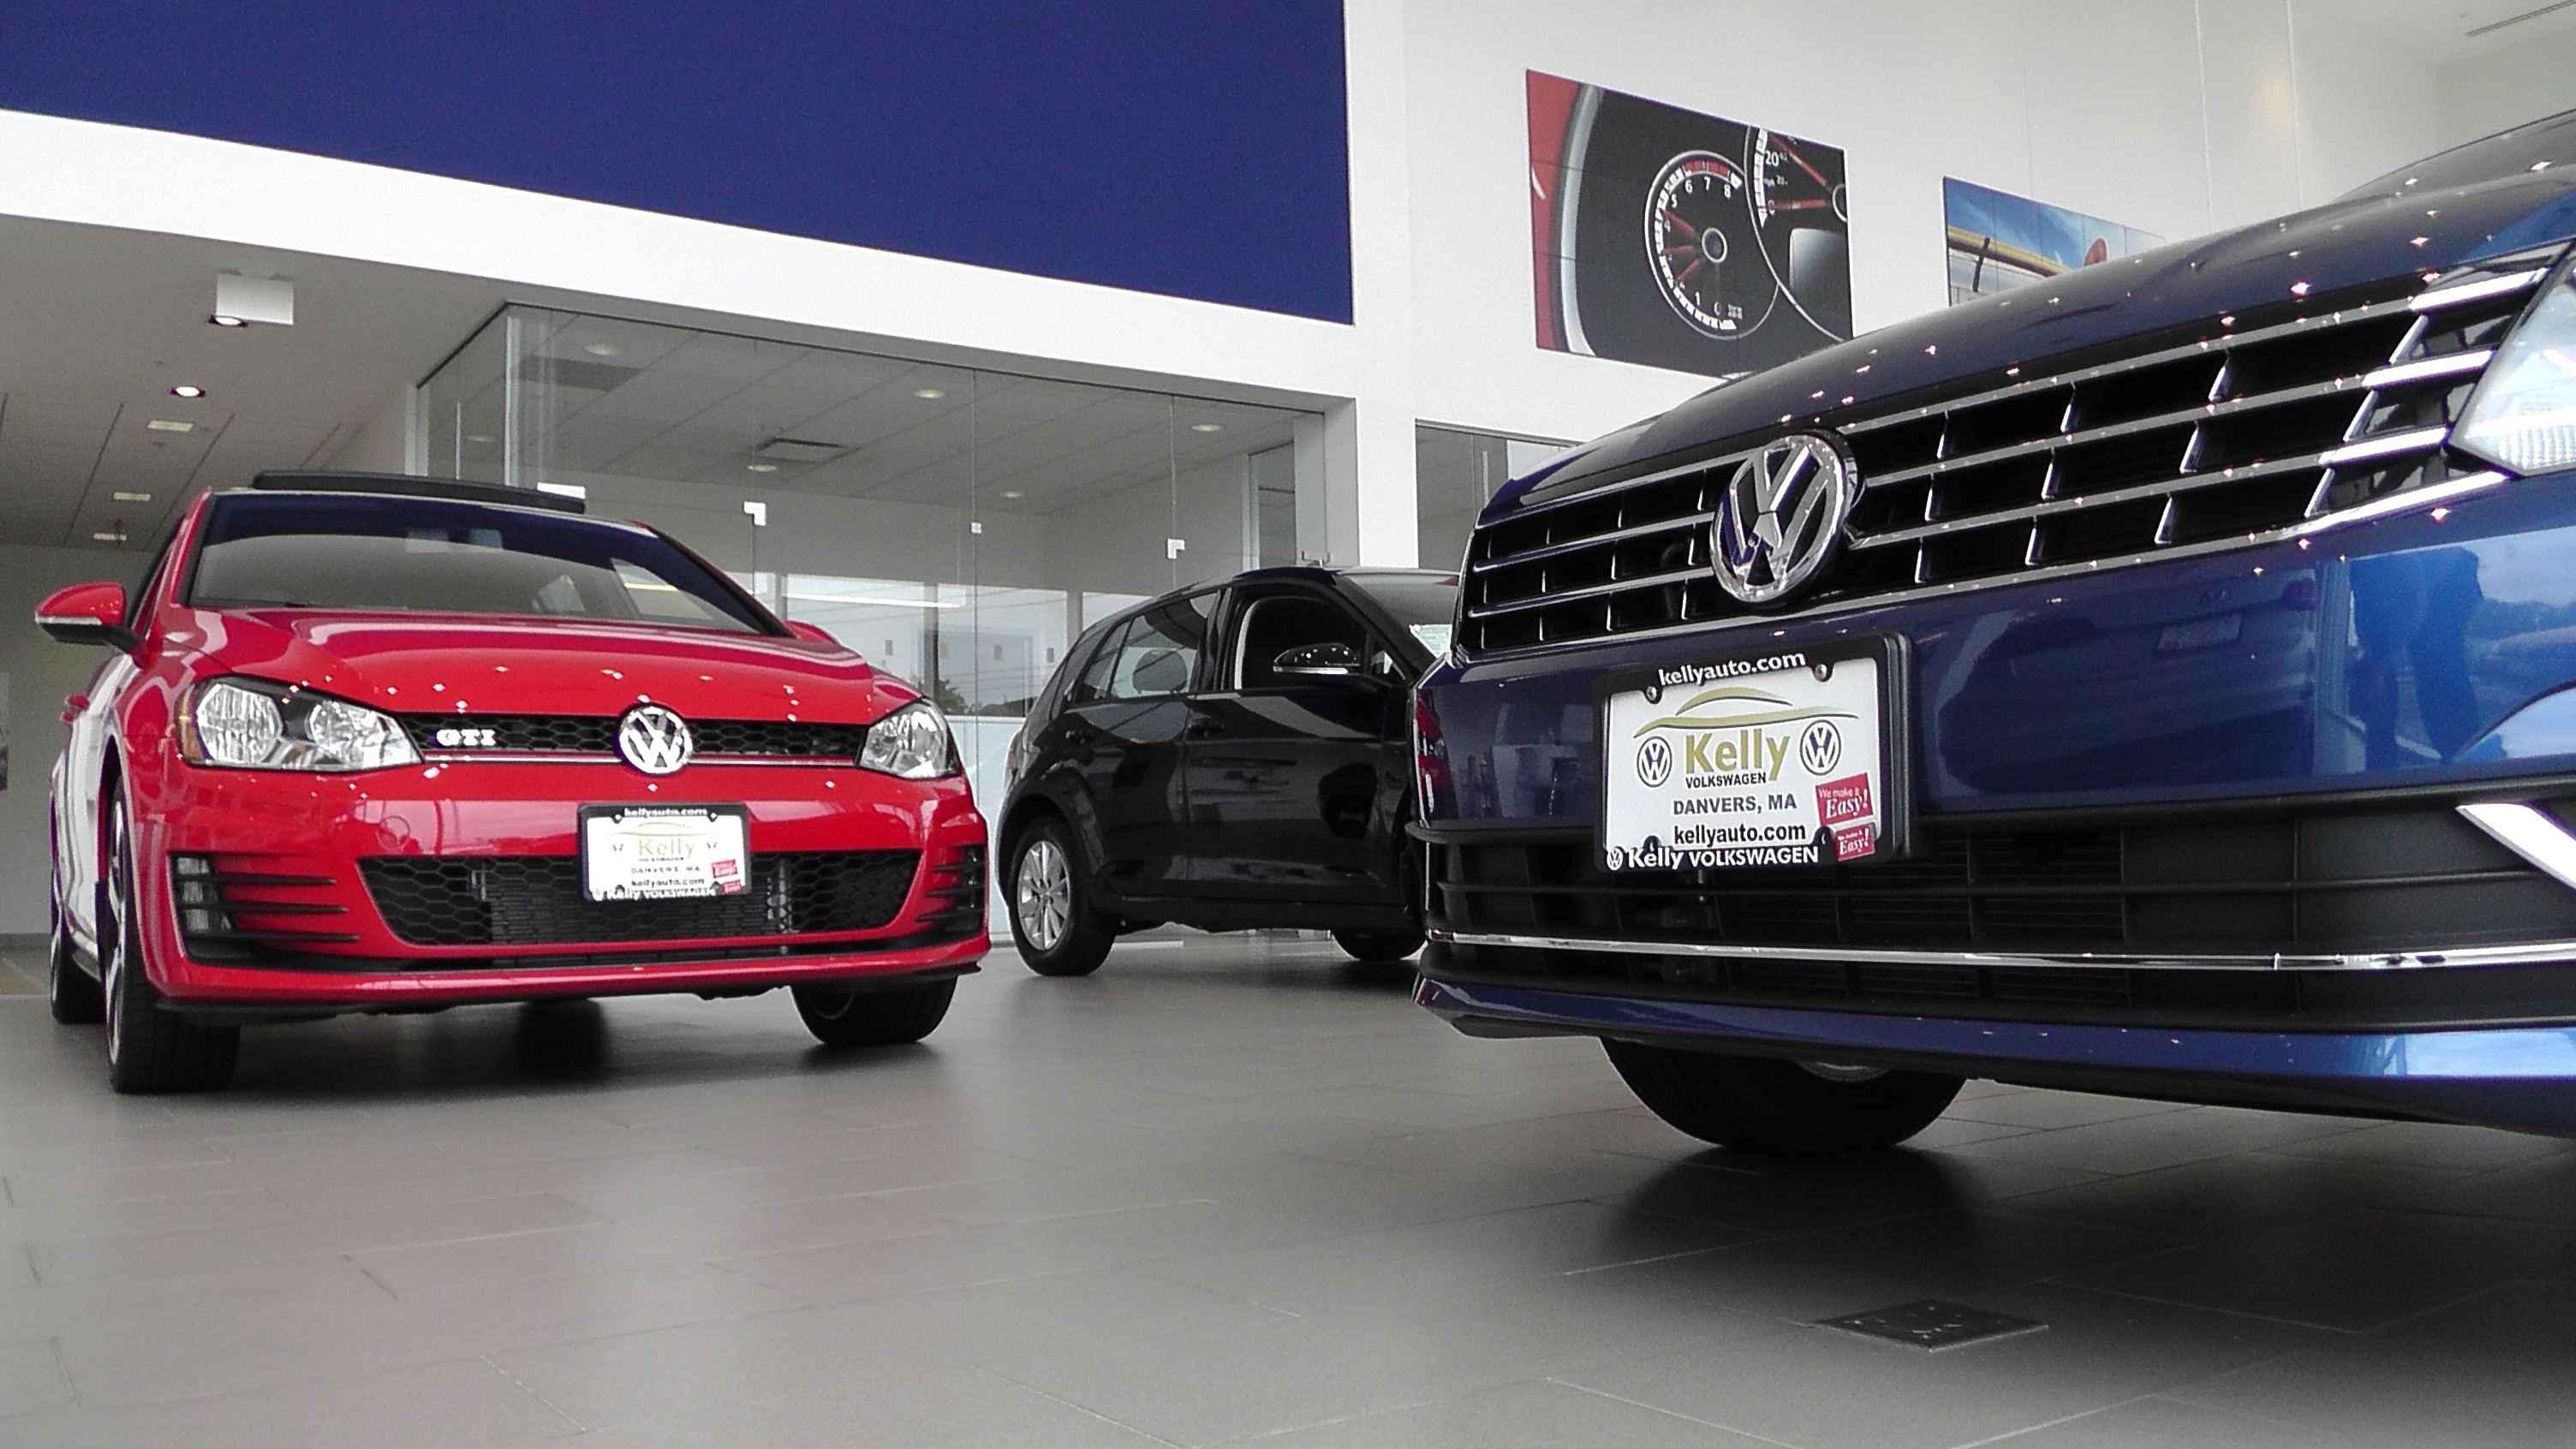 Our VW customer showroom has the latest Volkswagen products on-display for you to browse as you shop. Sit inside models like the GTI, Passat, Golf, Jetta, and more and ask one of our Volkswagen representatives for more information. We're here to help you with all of your questions and thoughts.